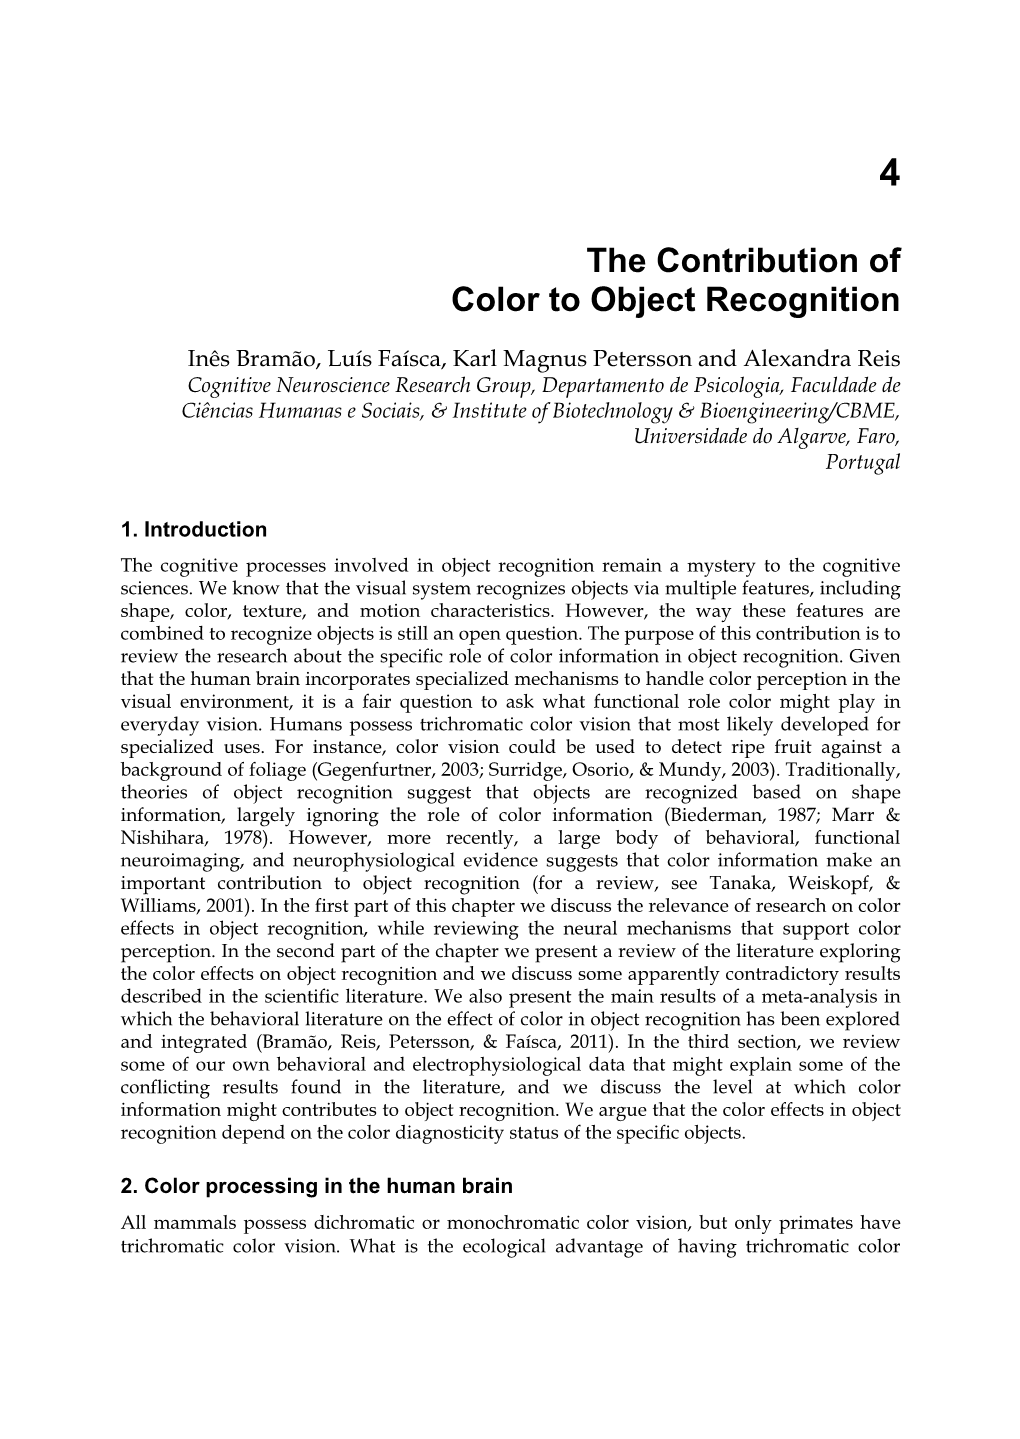 The Contribution of Color to Object Recognition